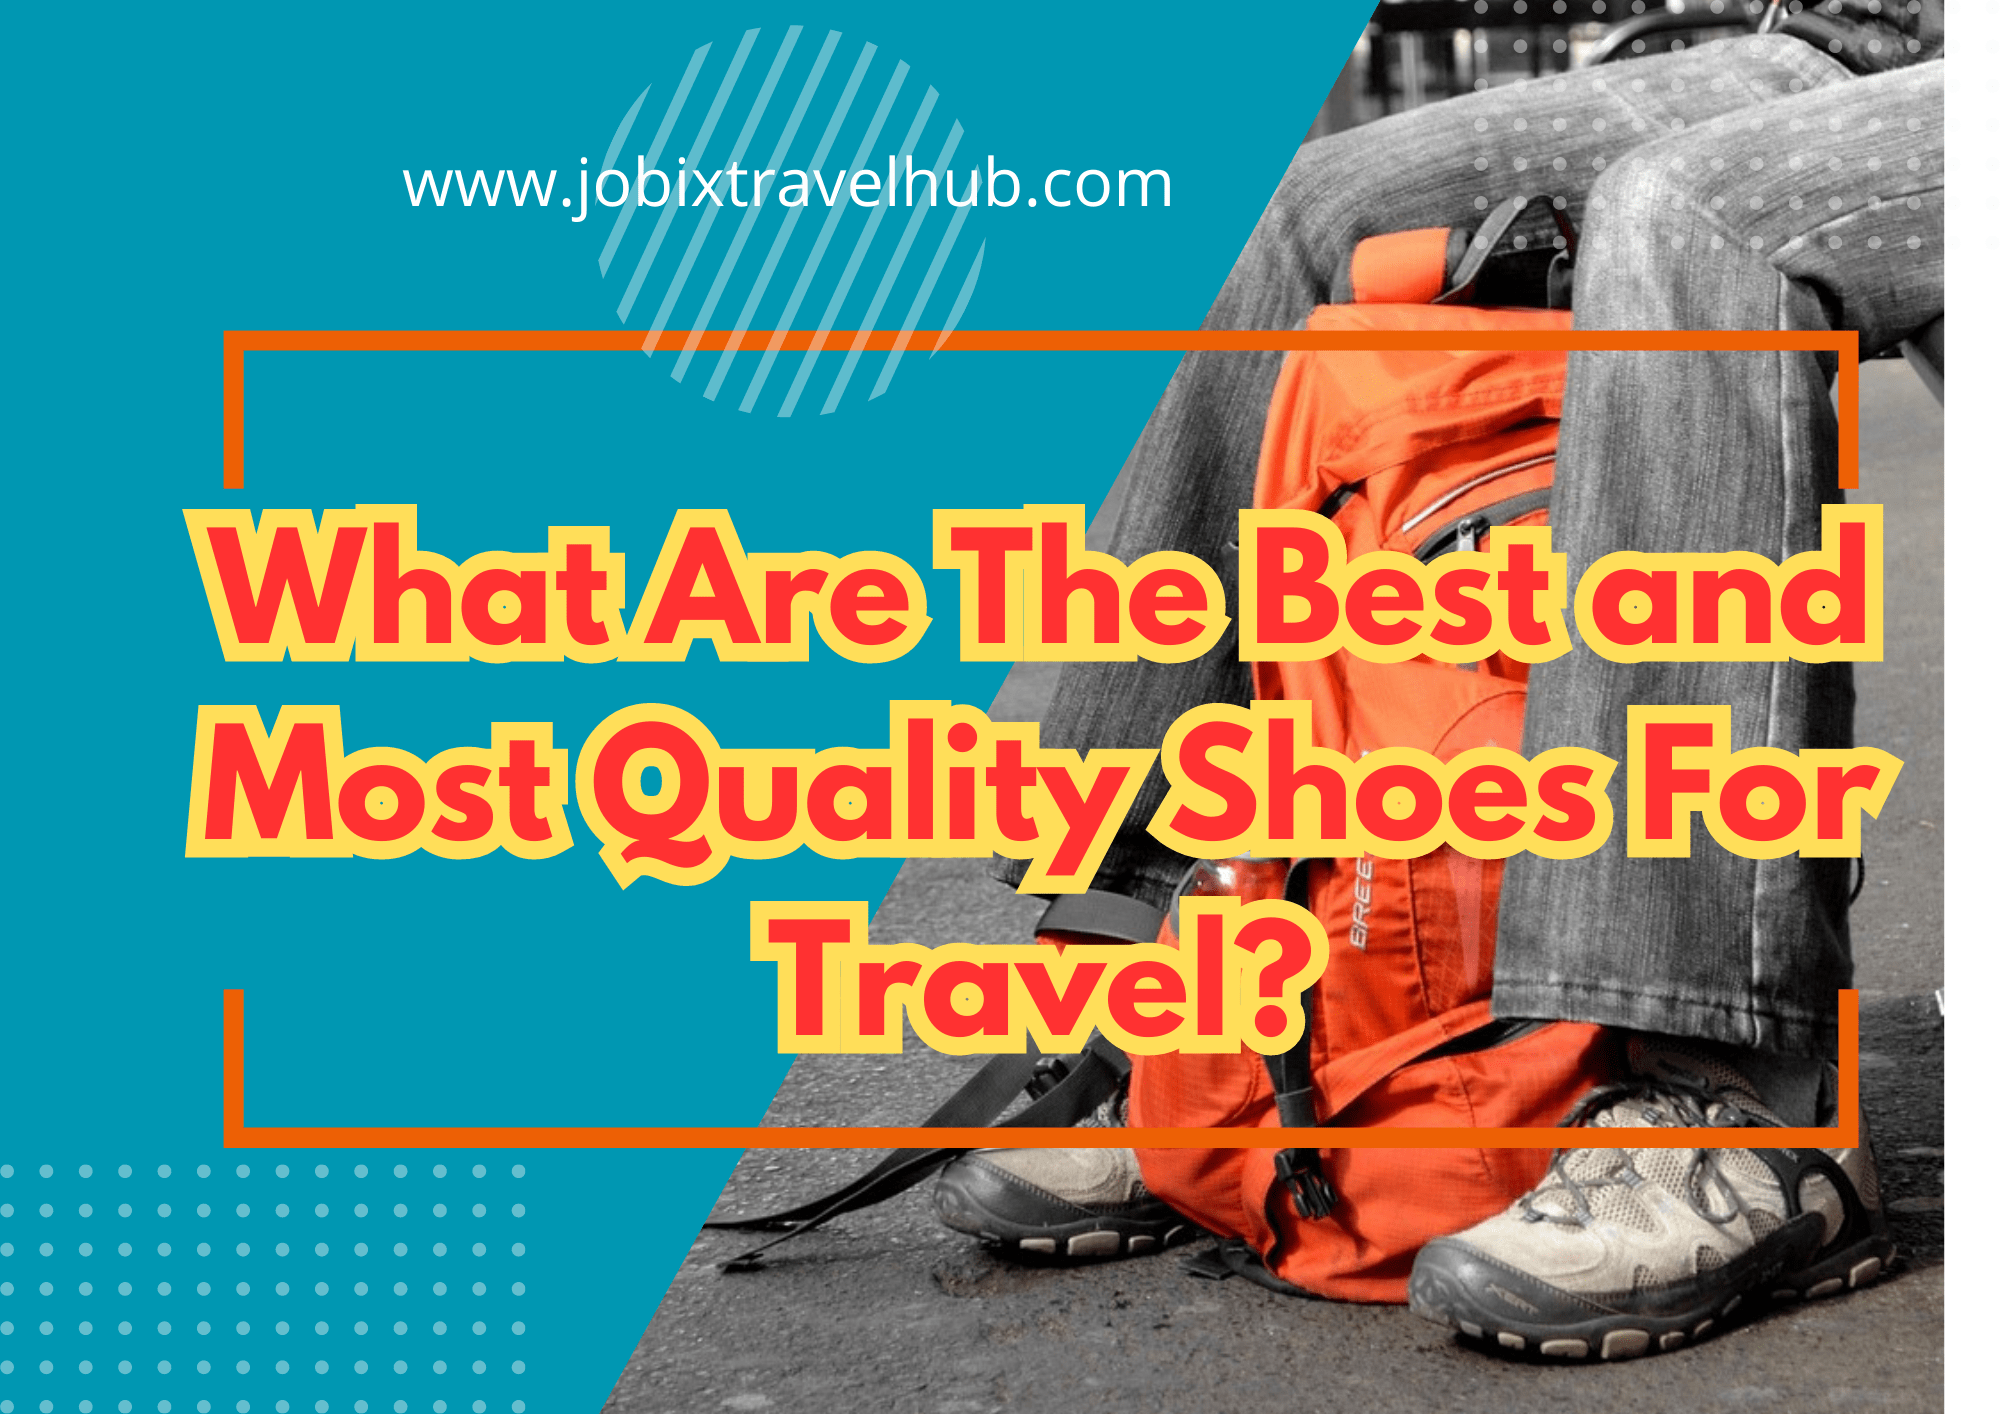 Are you looking for the best shoes to make your journeys more comfortable and stylish? Let us introduce you to the best shoes for travel!